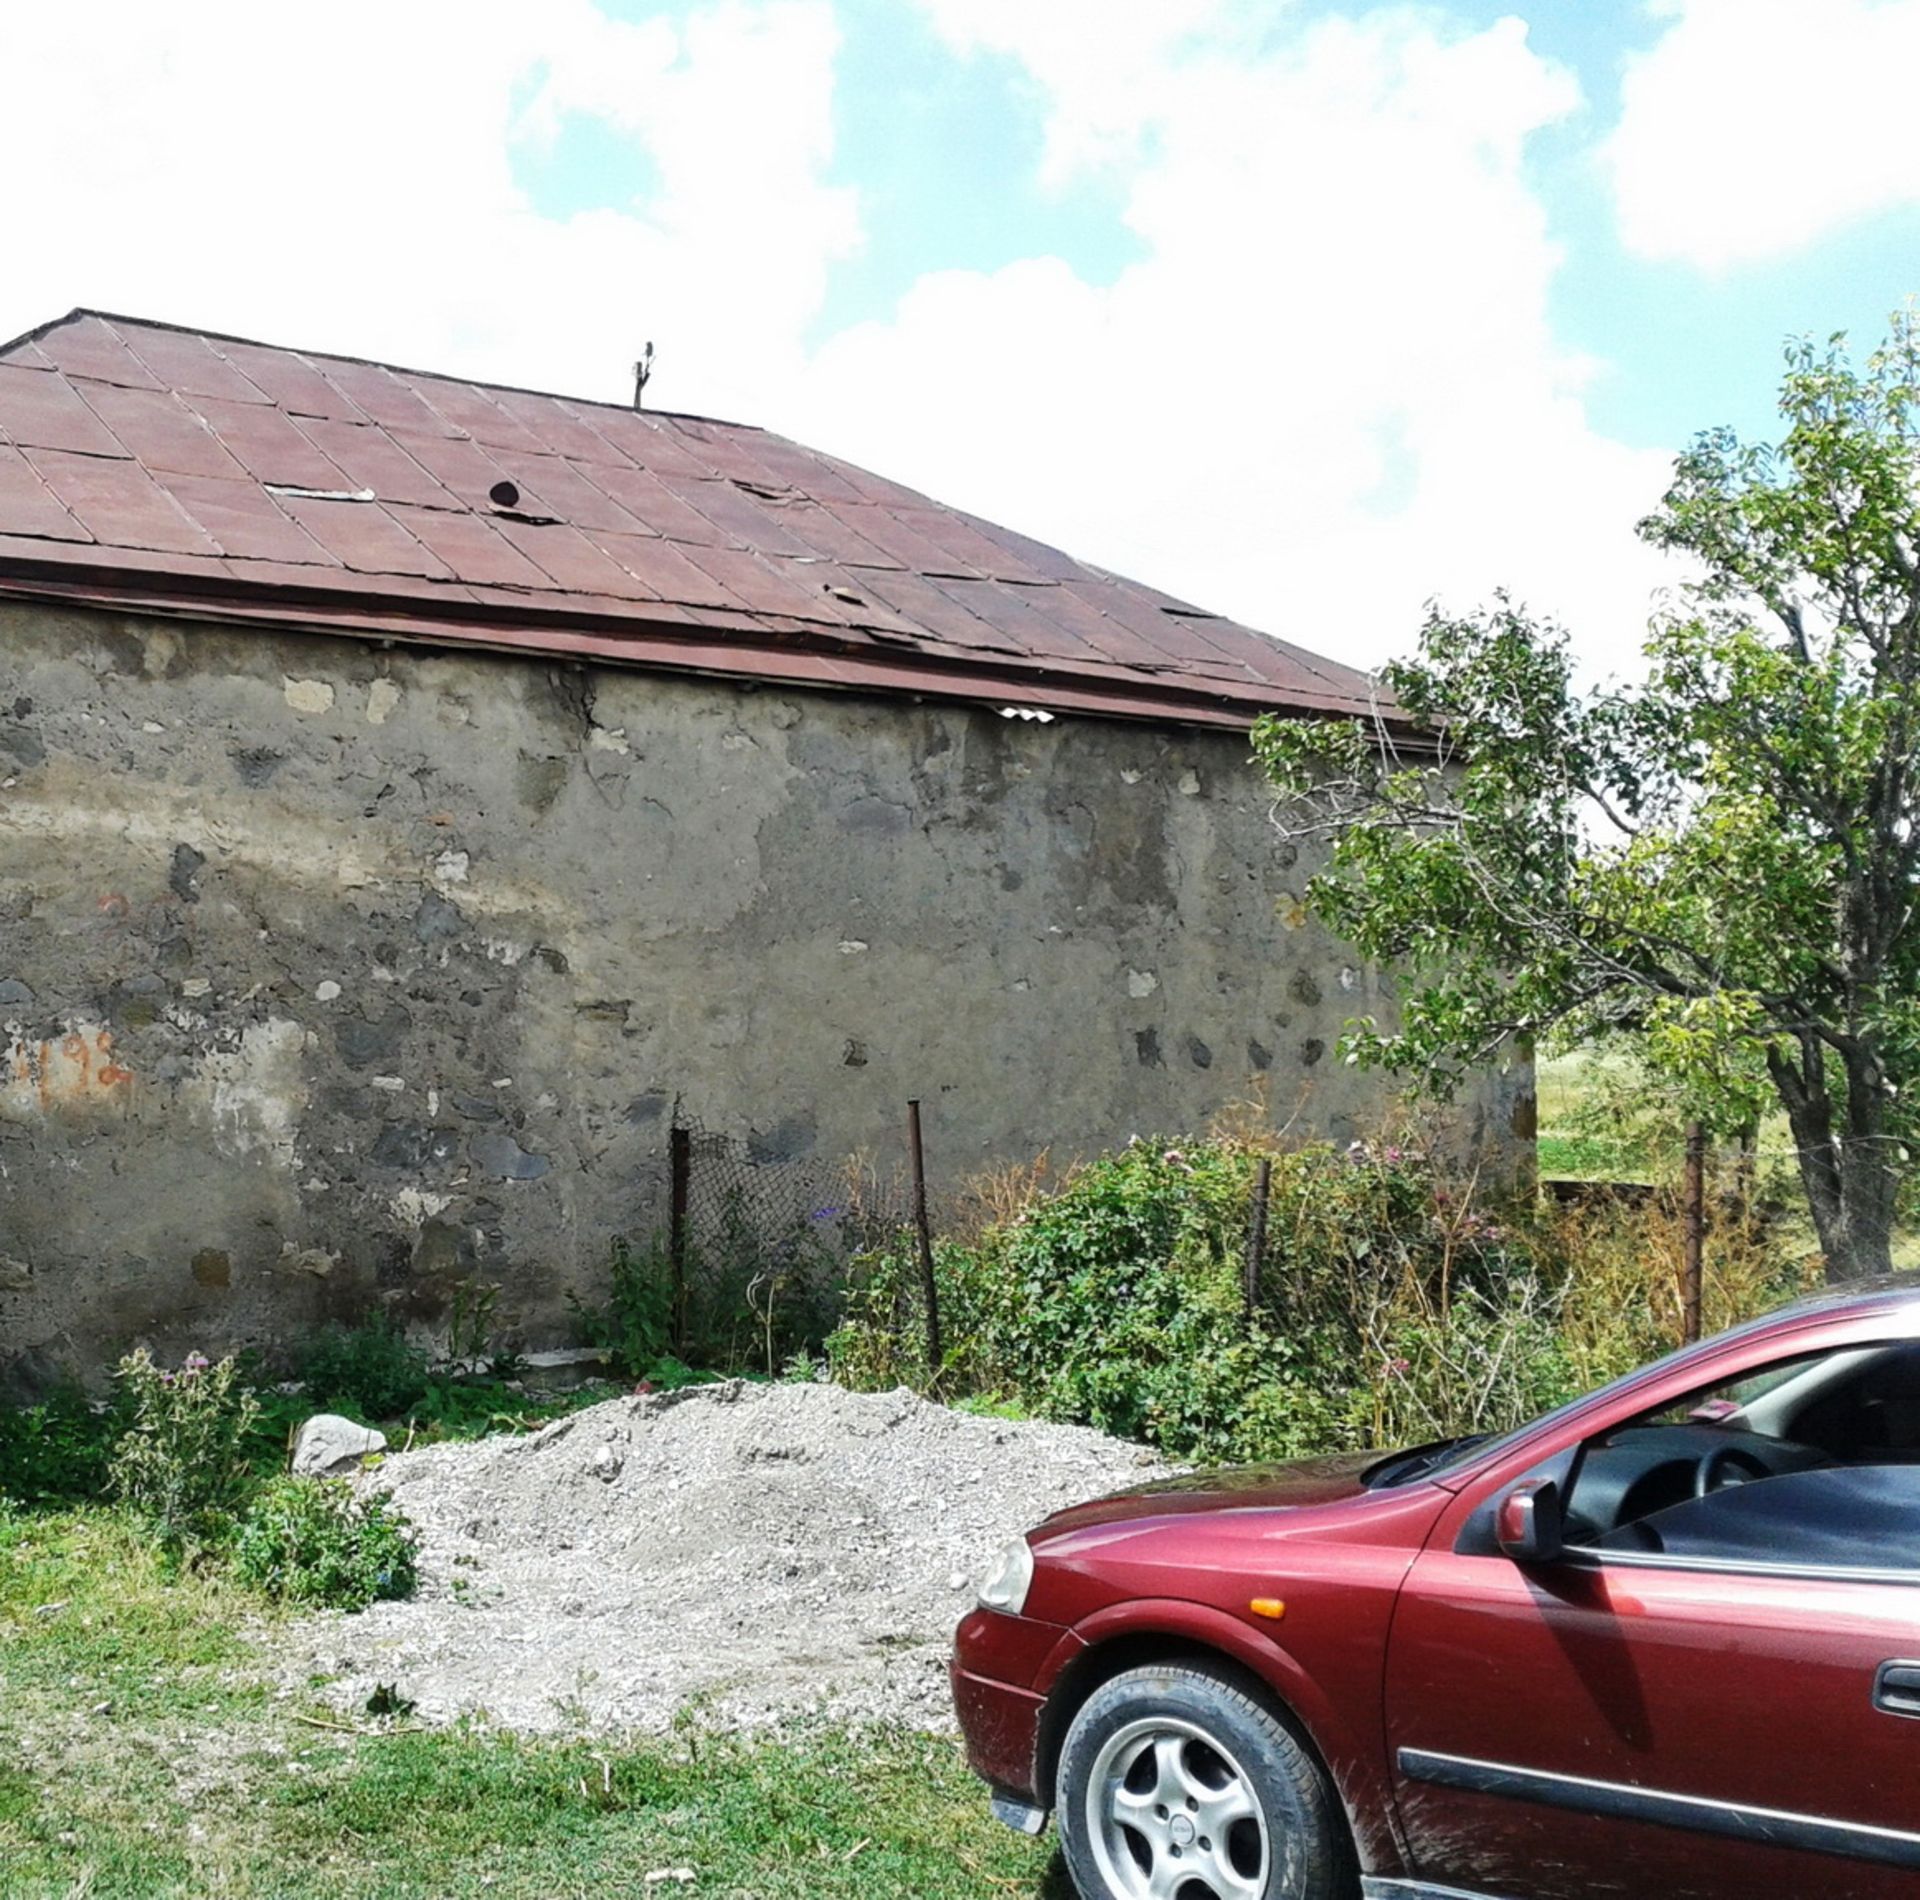 HOUSE IN 1 ACRE IN SOTK, ARMENIA - Image 7 of 35